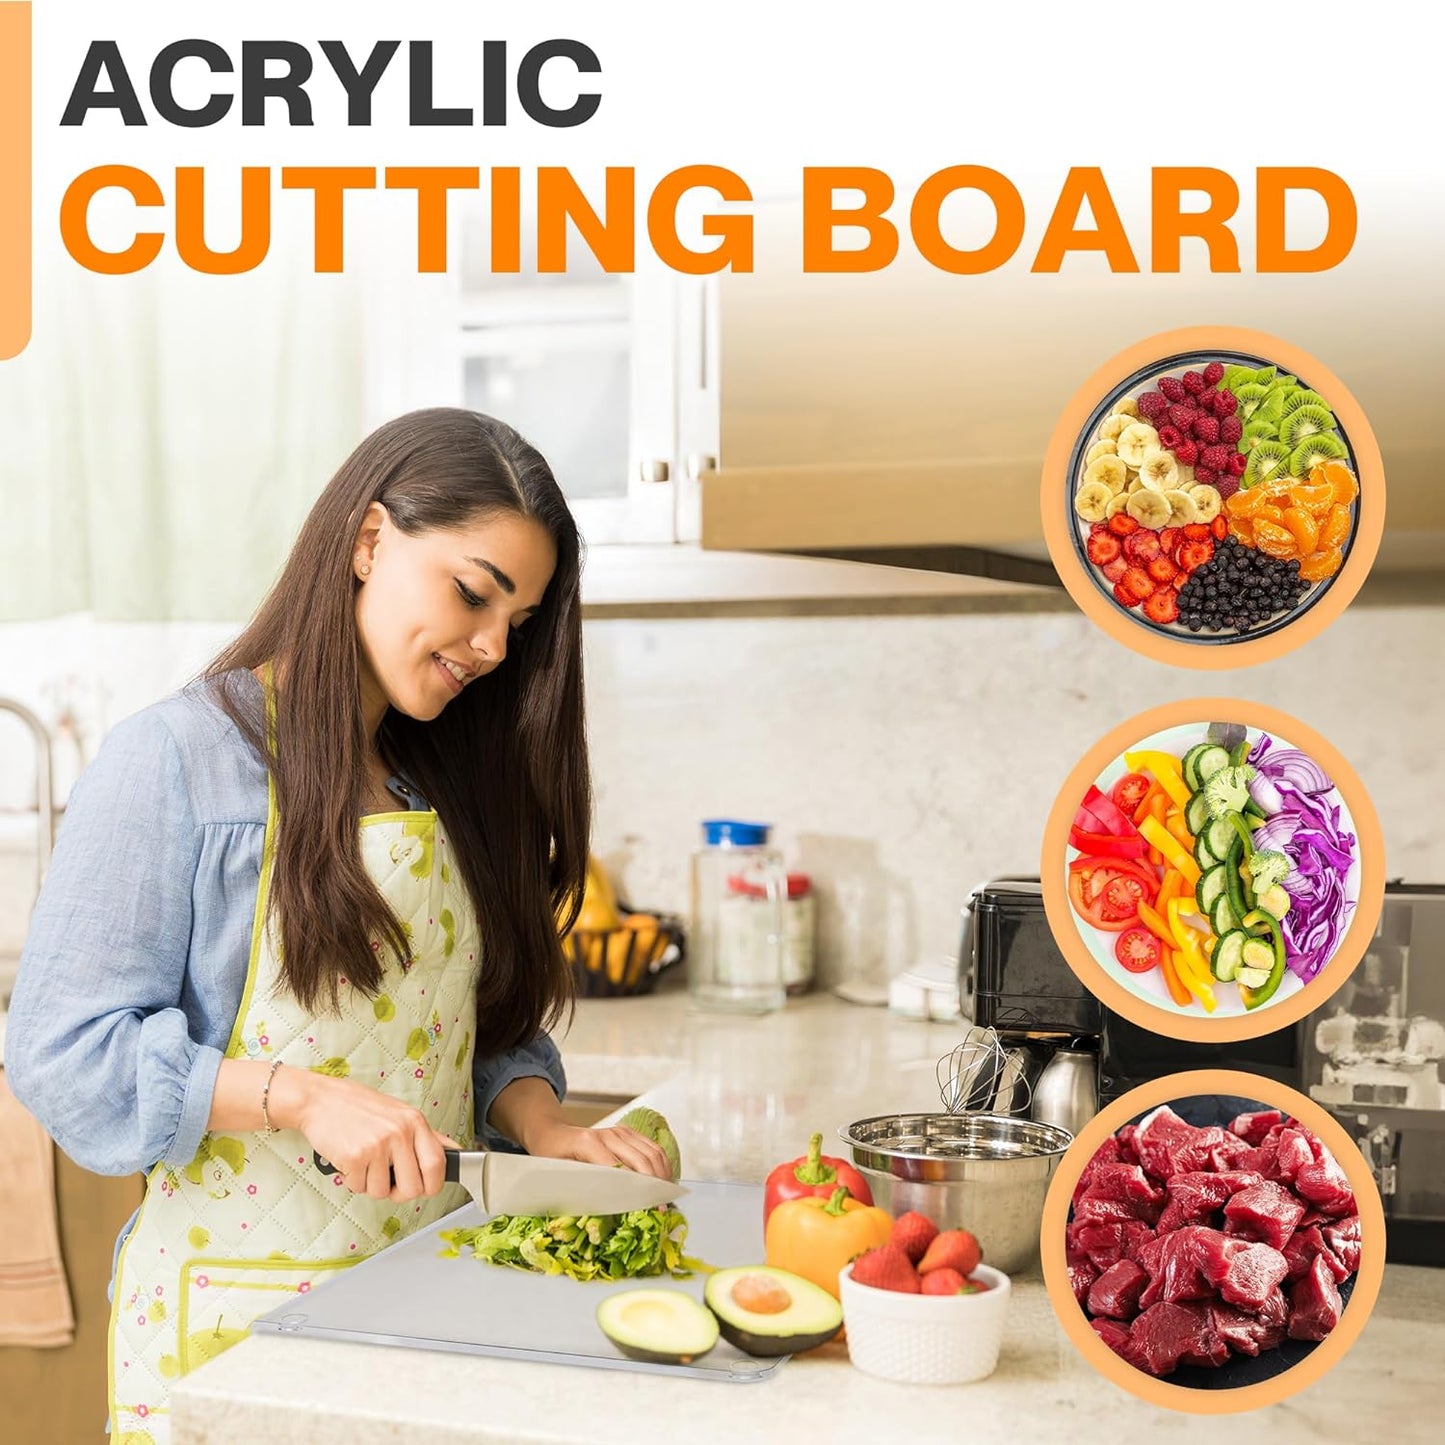 DisplayBug Clear Cutting Board for Countertop – 24 x 18-inch Acrylic Cutting Boards for Kitchen Counter – Food-Grade Acrylic Chopping Board with Lip – Non-Slip Acrylic Board